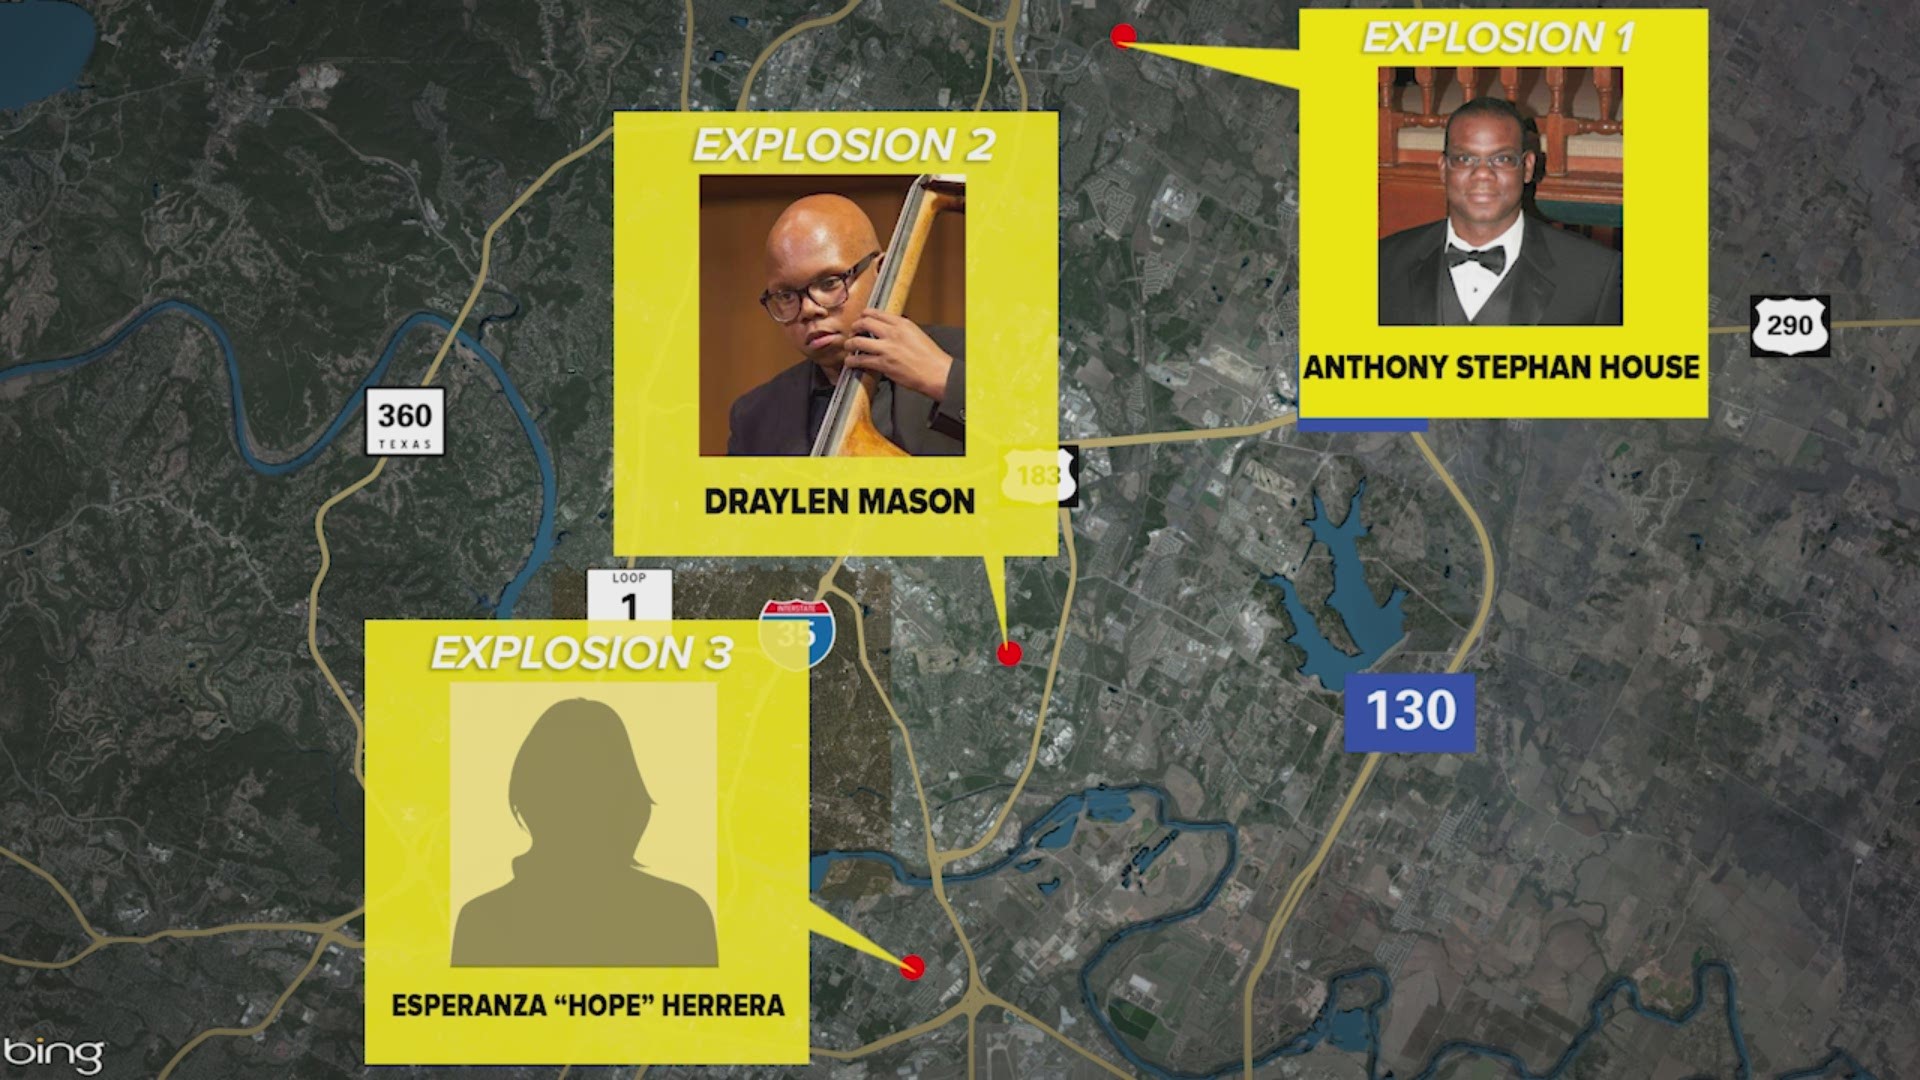 A timeline of the three Austin explosions that occurred in March.